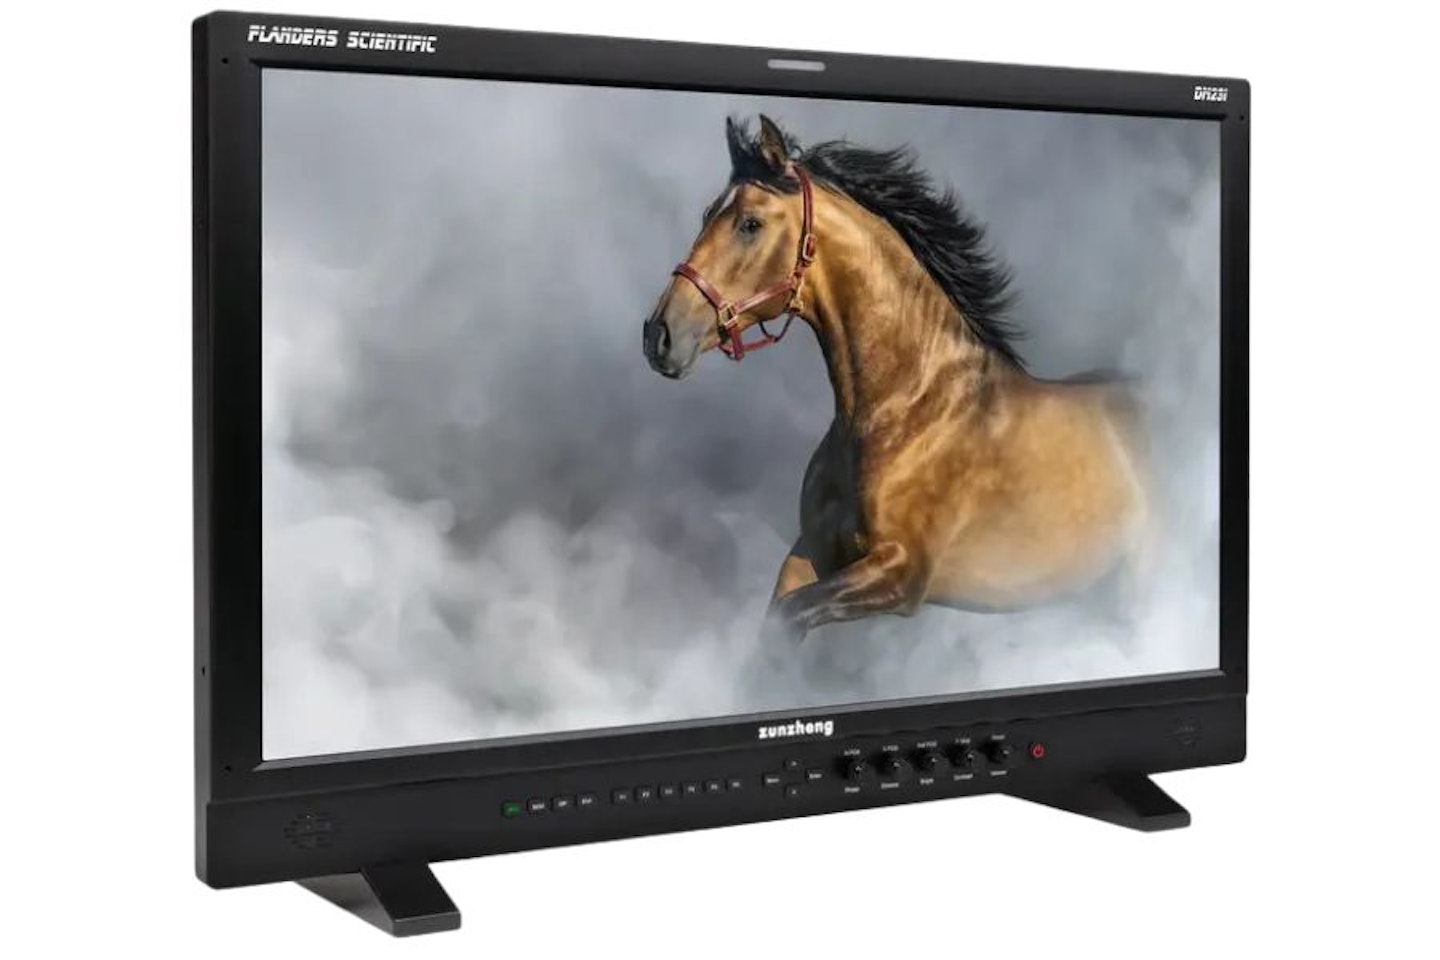 A black monitor with a small stand, a horse is shown on the display